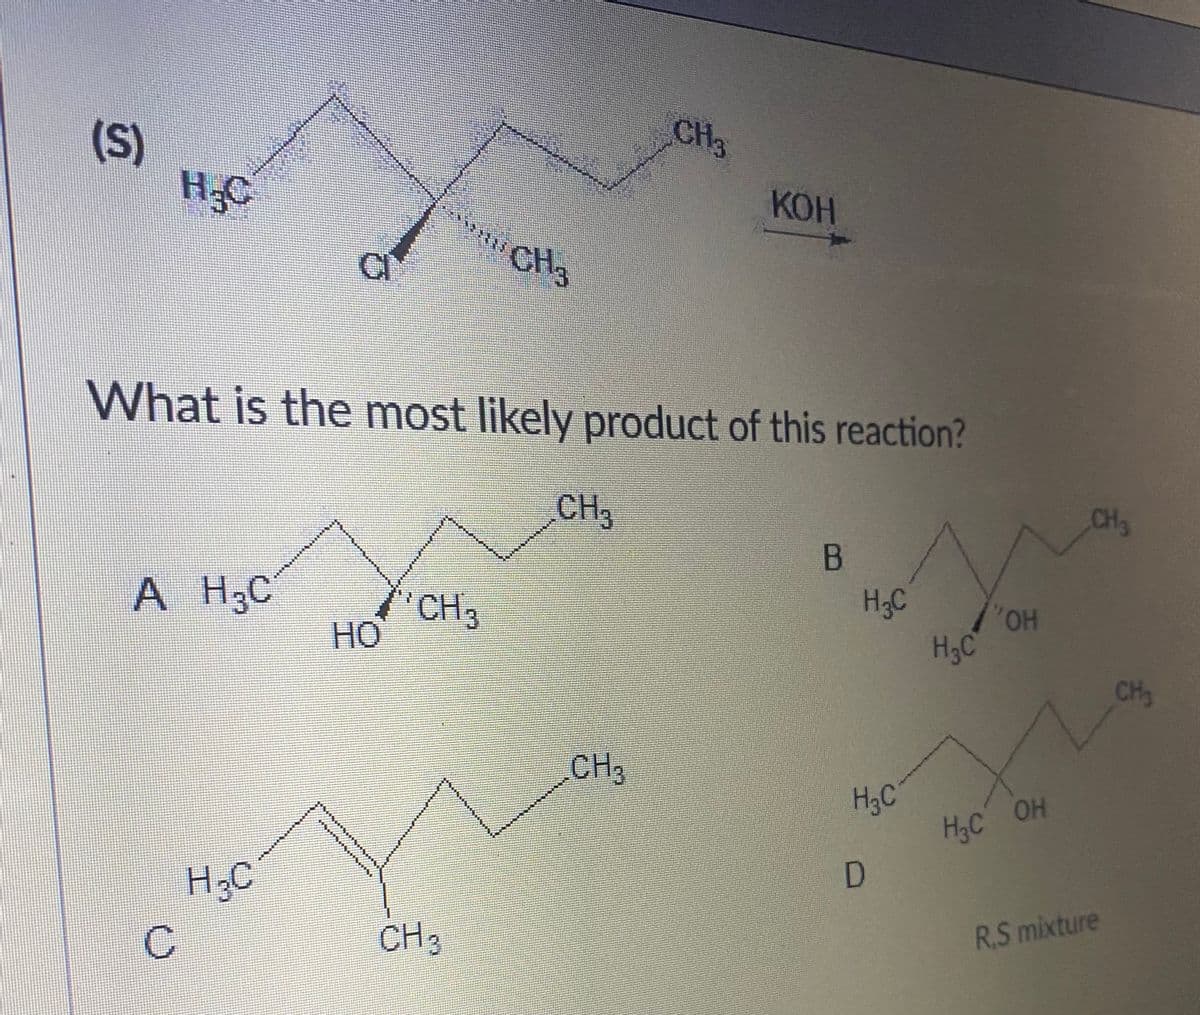 CH3
(S)
H.C
КОН
C
CH3
What is the most likely product of this reaction?
CH
CH3
B
A H,C
CH3
H3C
HO,
HO
H3C
CH
CH
H3C
H;C OH
H3C
H;C
CH3
R.S mixture
C.
工
